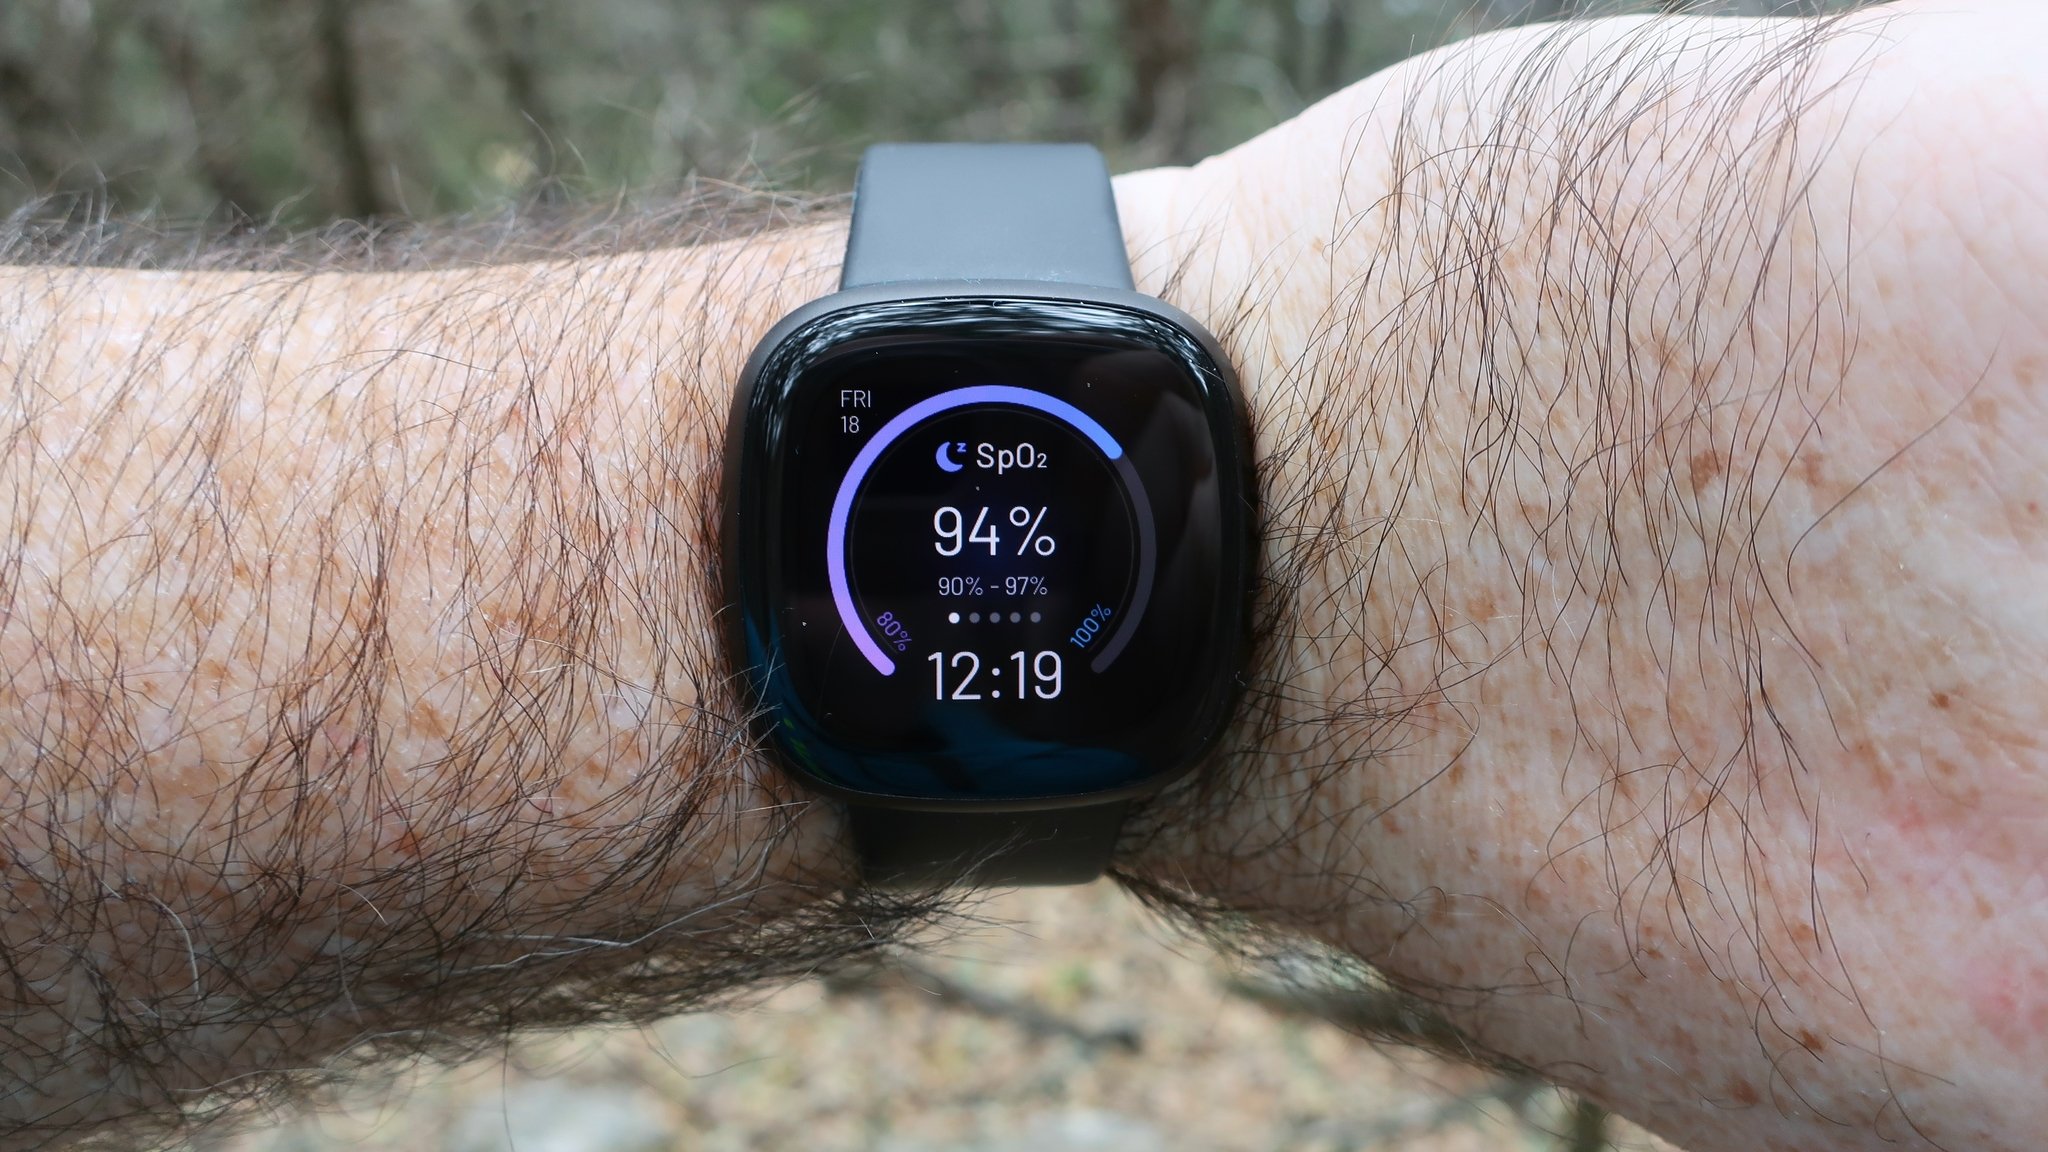 How to use the SpO2 sensor and watch face on your Fitbit | Android